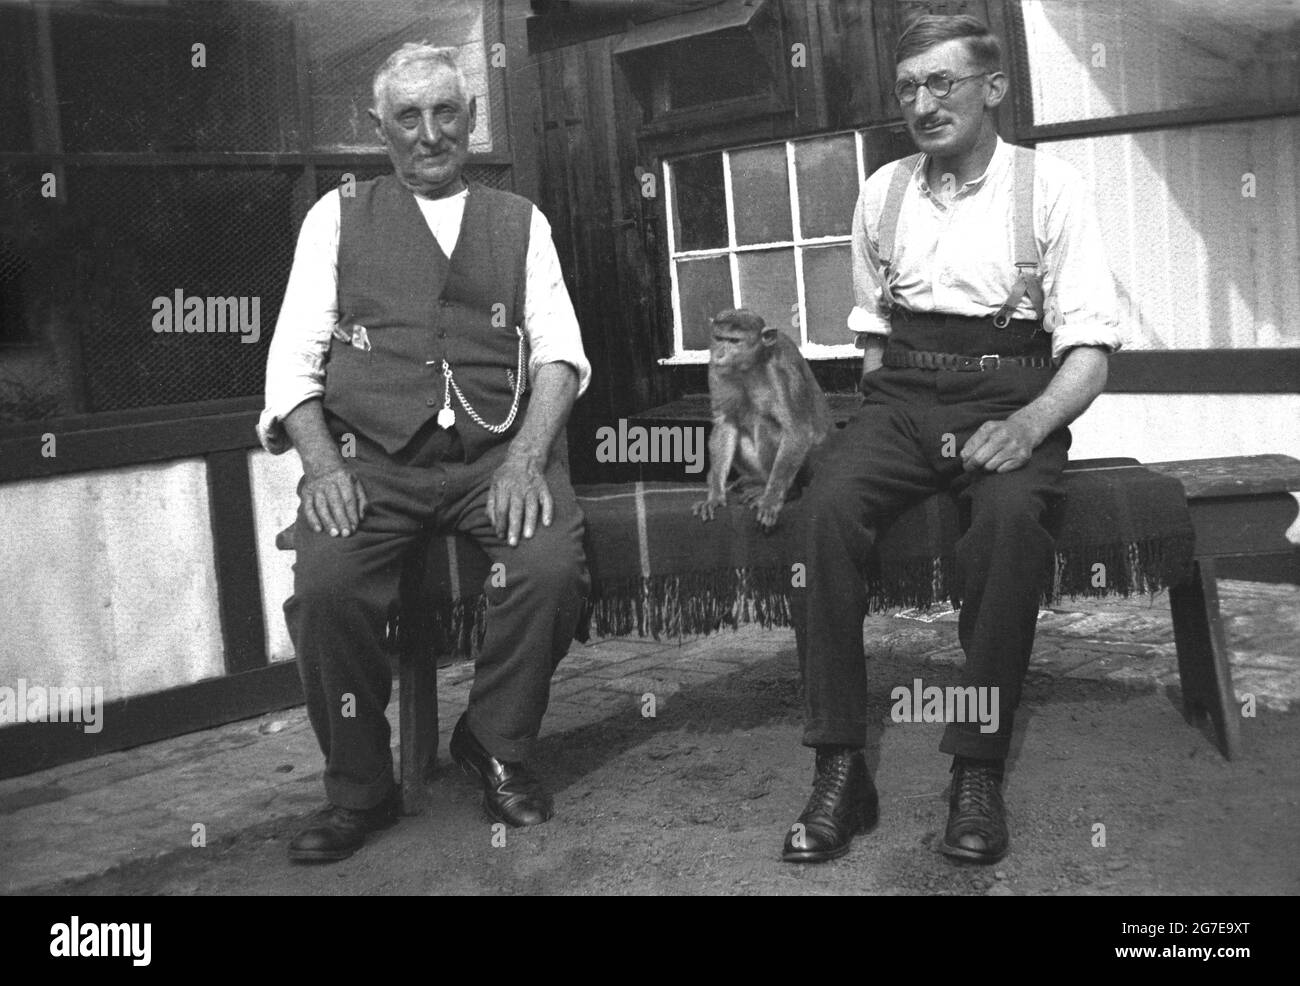 1930s, historical, two working men, possibly farmders, in the traditional male dress of the era, one wearing braces, the older man wearing a waistcoat with a pocket watch on a chain, sitting outside on a rug over a wooden bench with a little monkey sitting with them, Mirfield, Yorkshire, England, UK Stock Photo